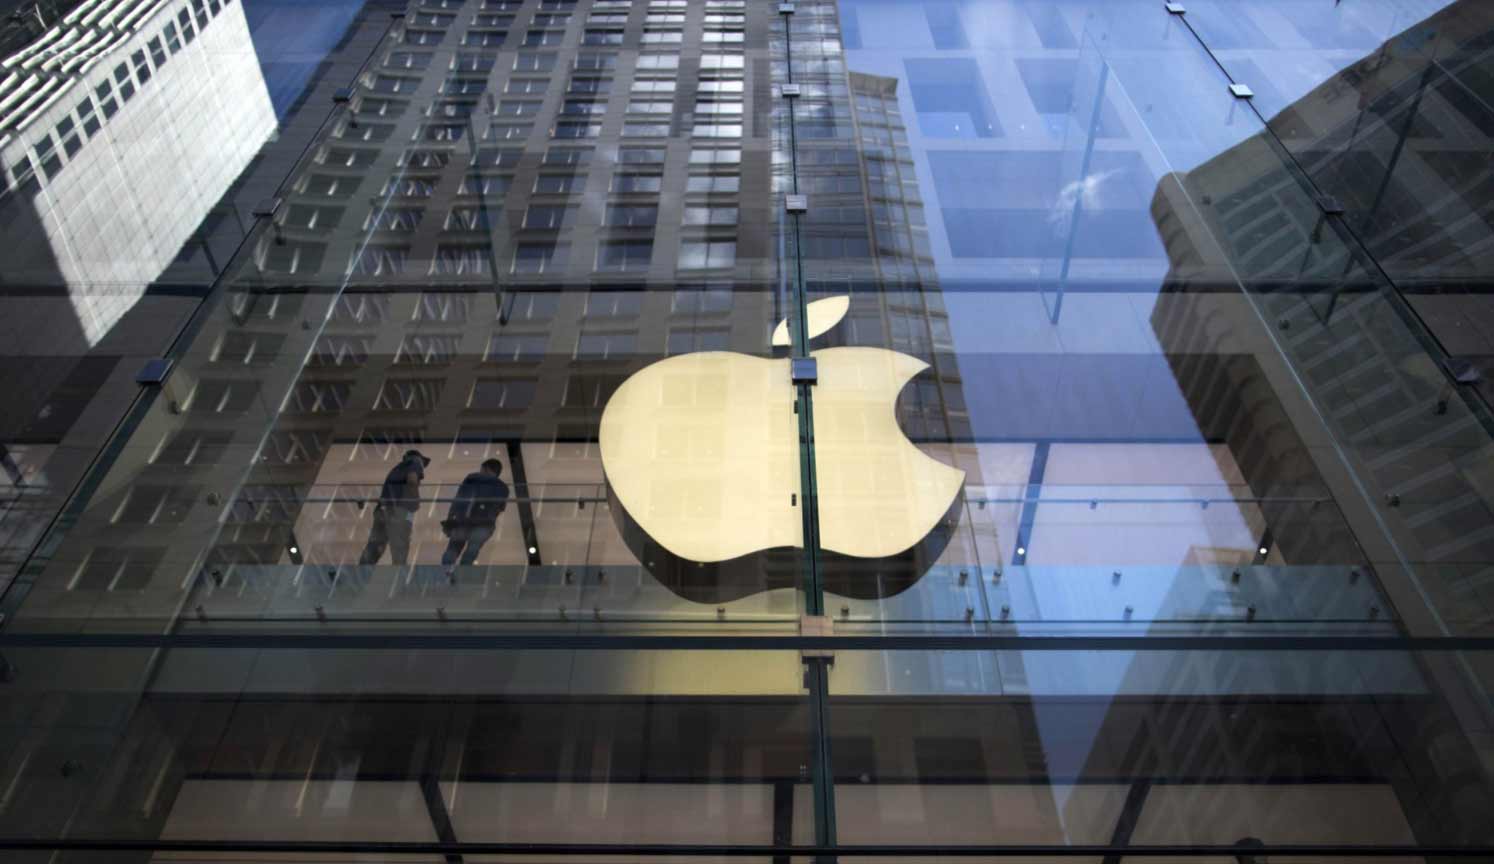 Apple to end credit card partnership with Goldman Sachs - WSJ